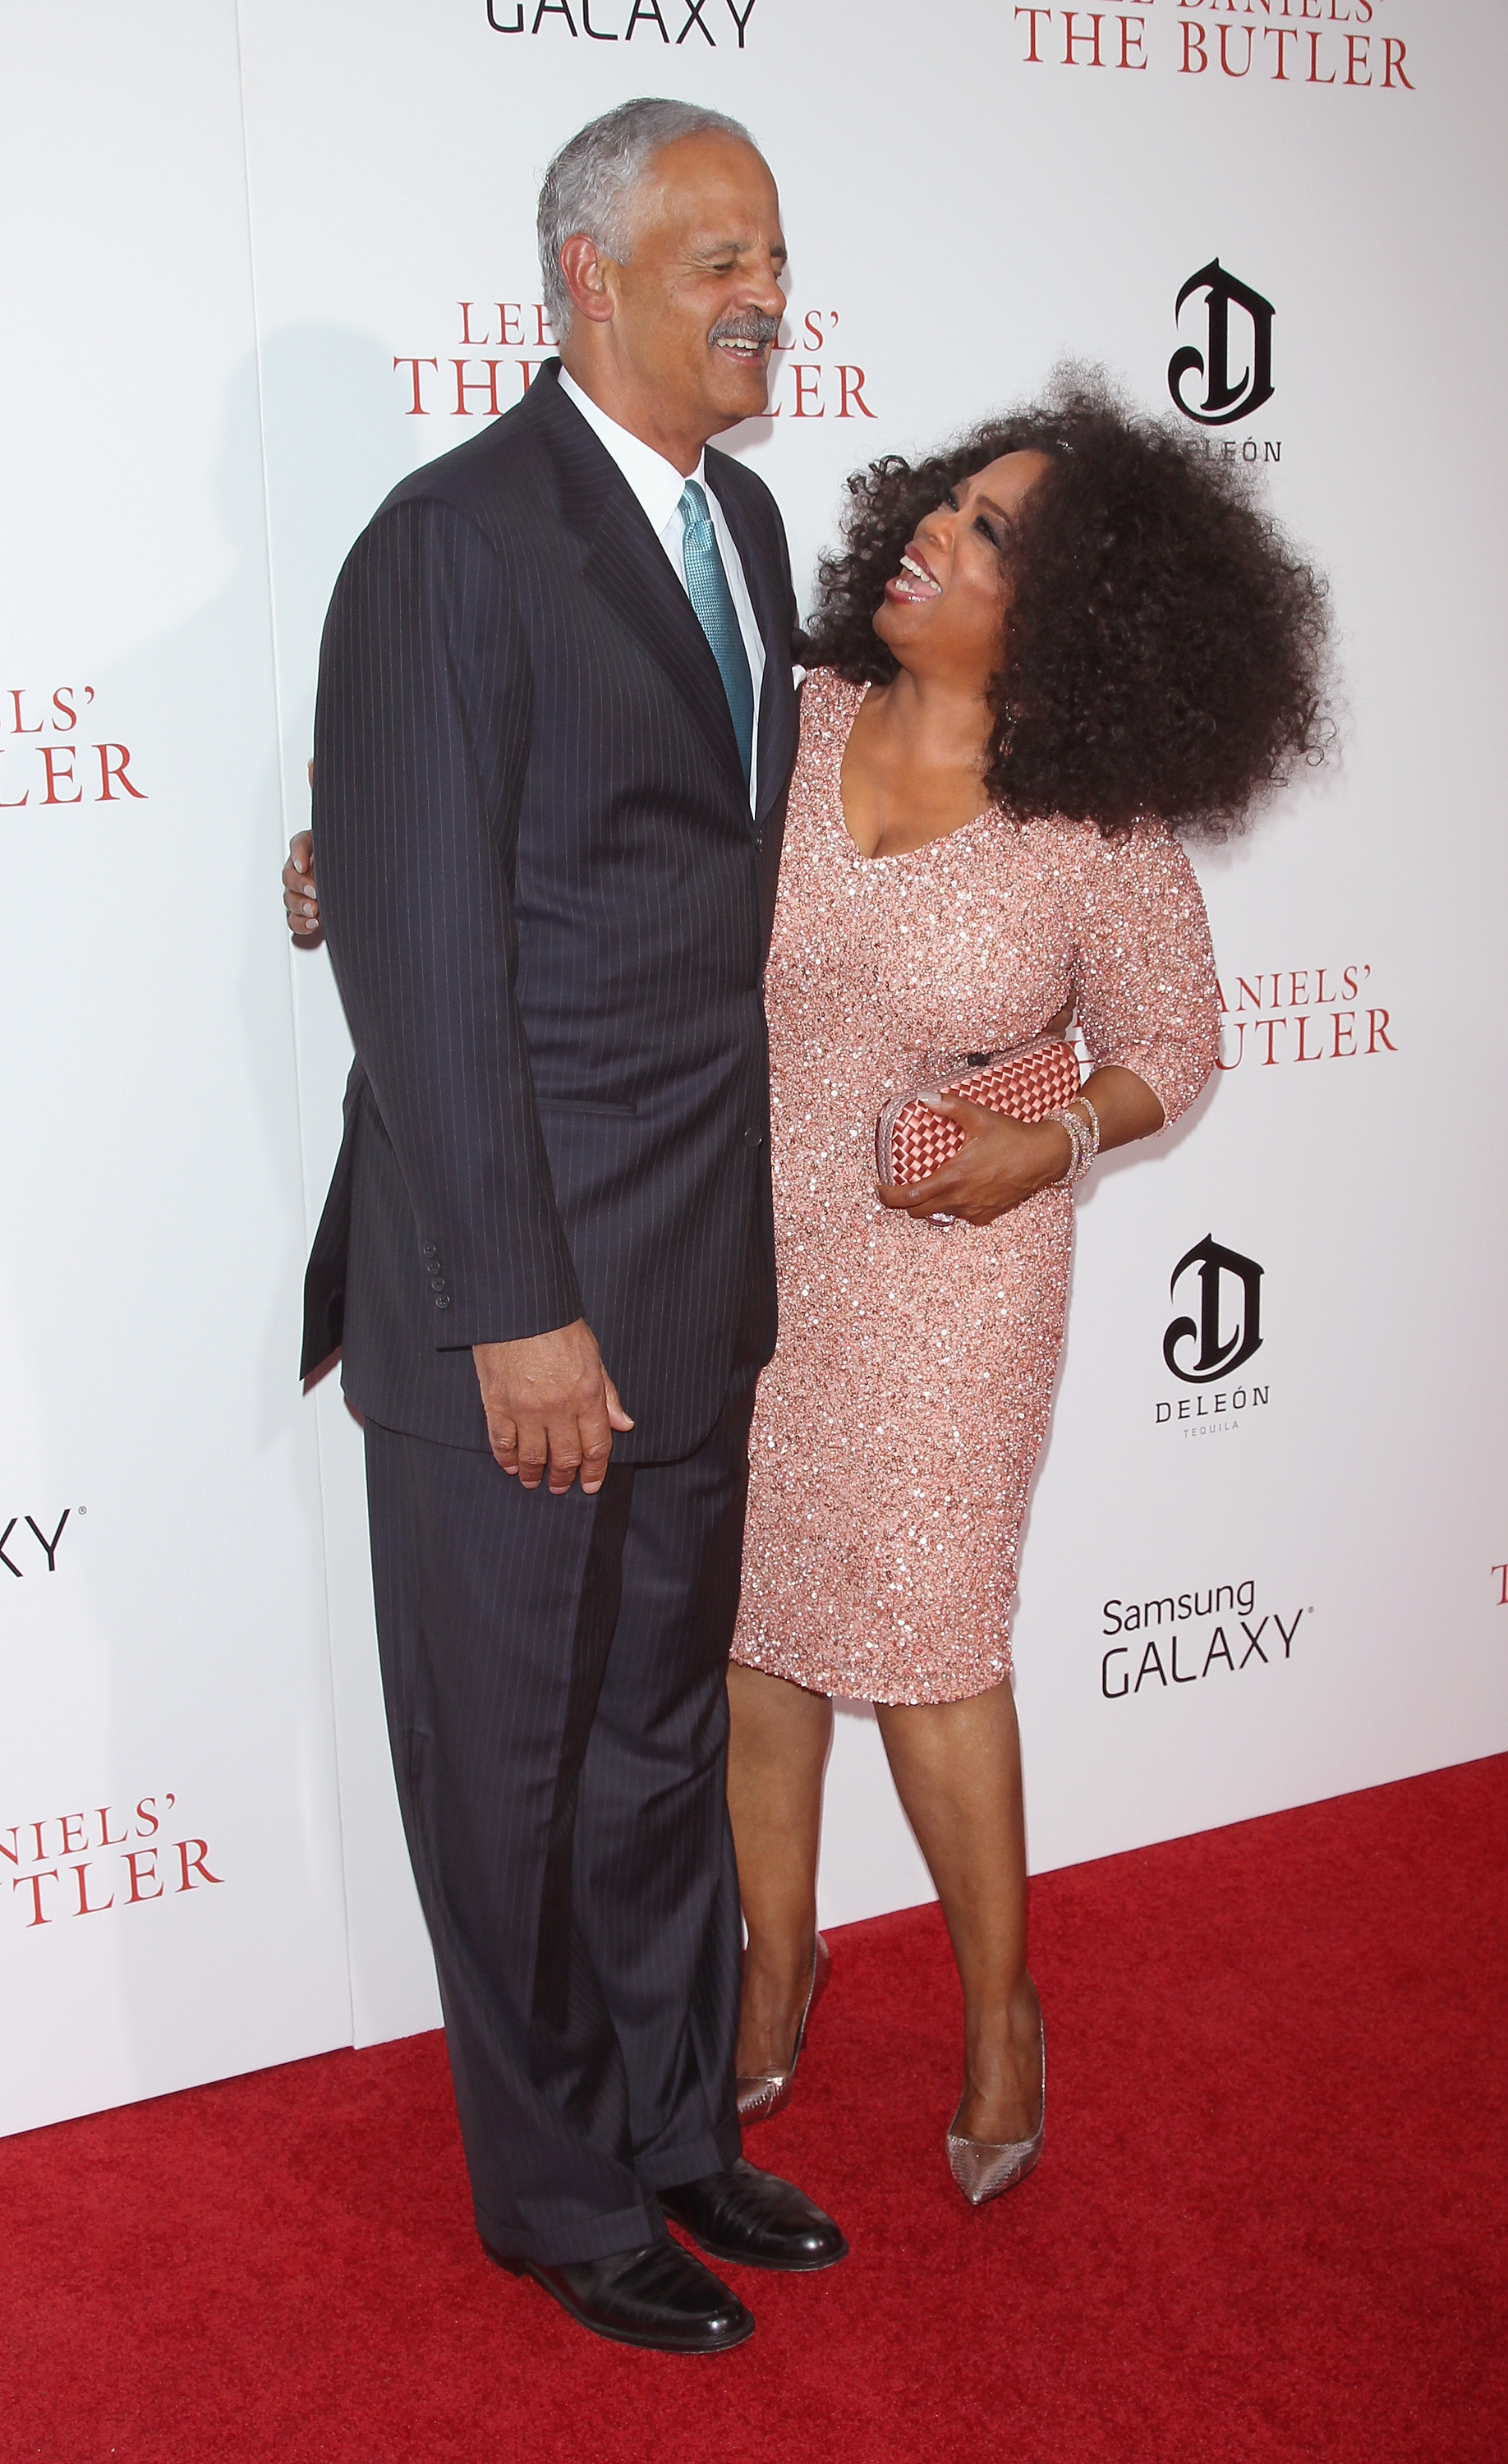 Stedman Graham and Oprah Winfrey in New York City on August 5, 2013 | Source: Getty Images